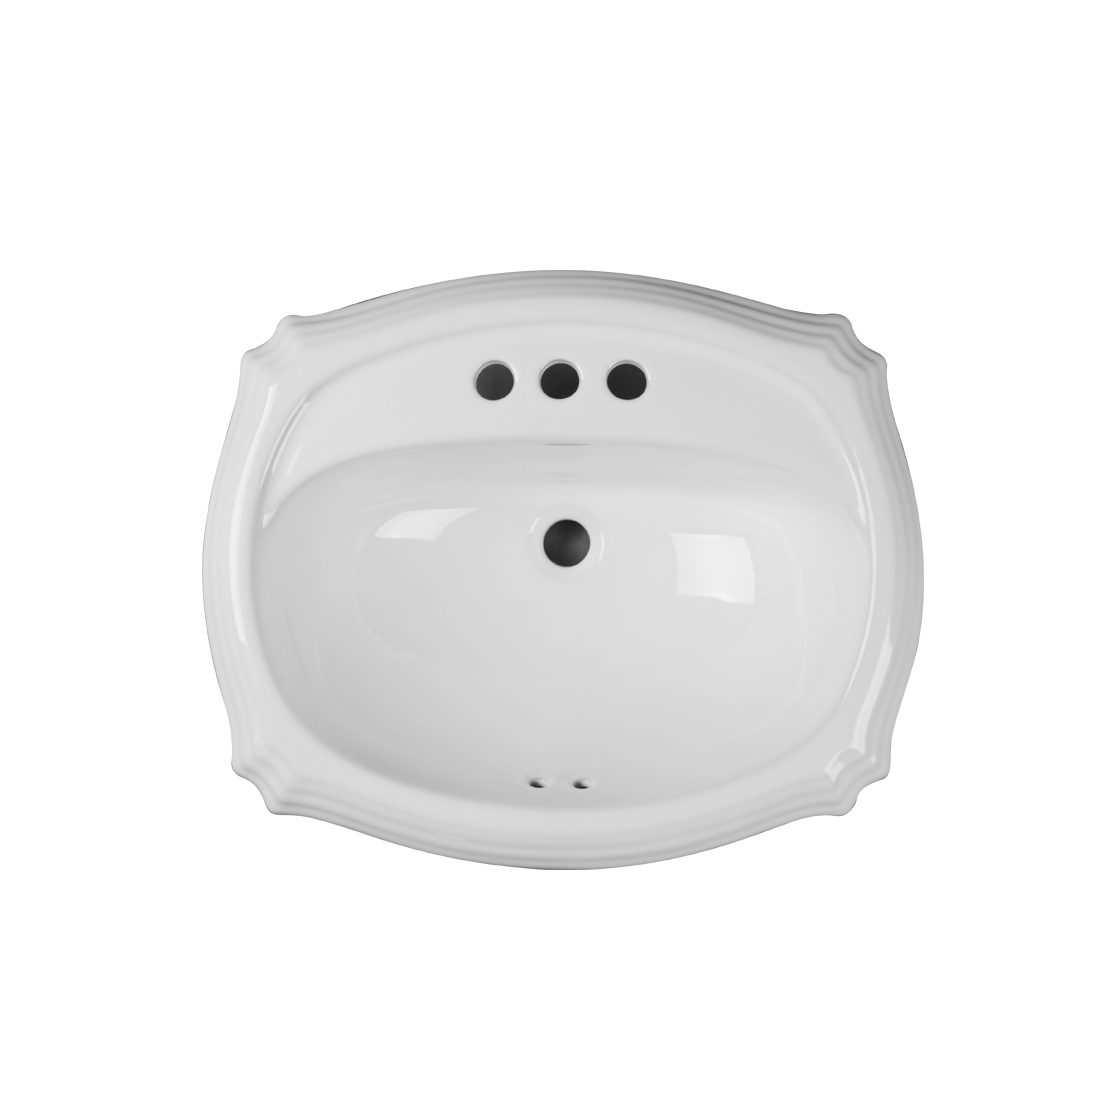 Anchorage Lavatory 3Hole 4inch White Up View